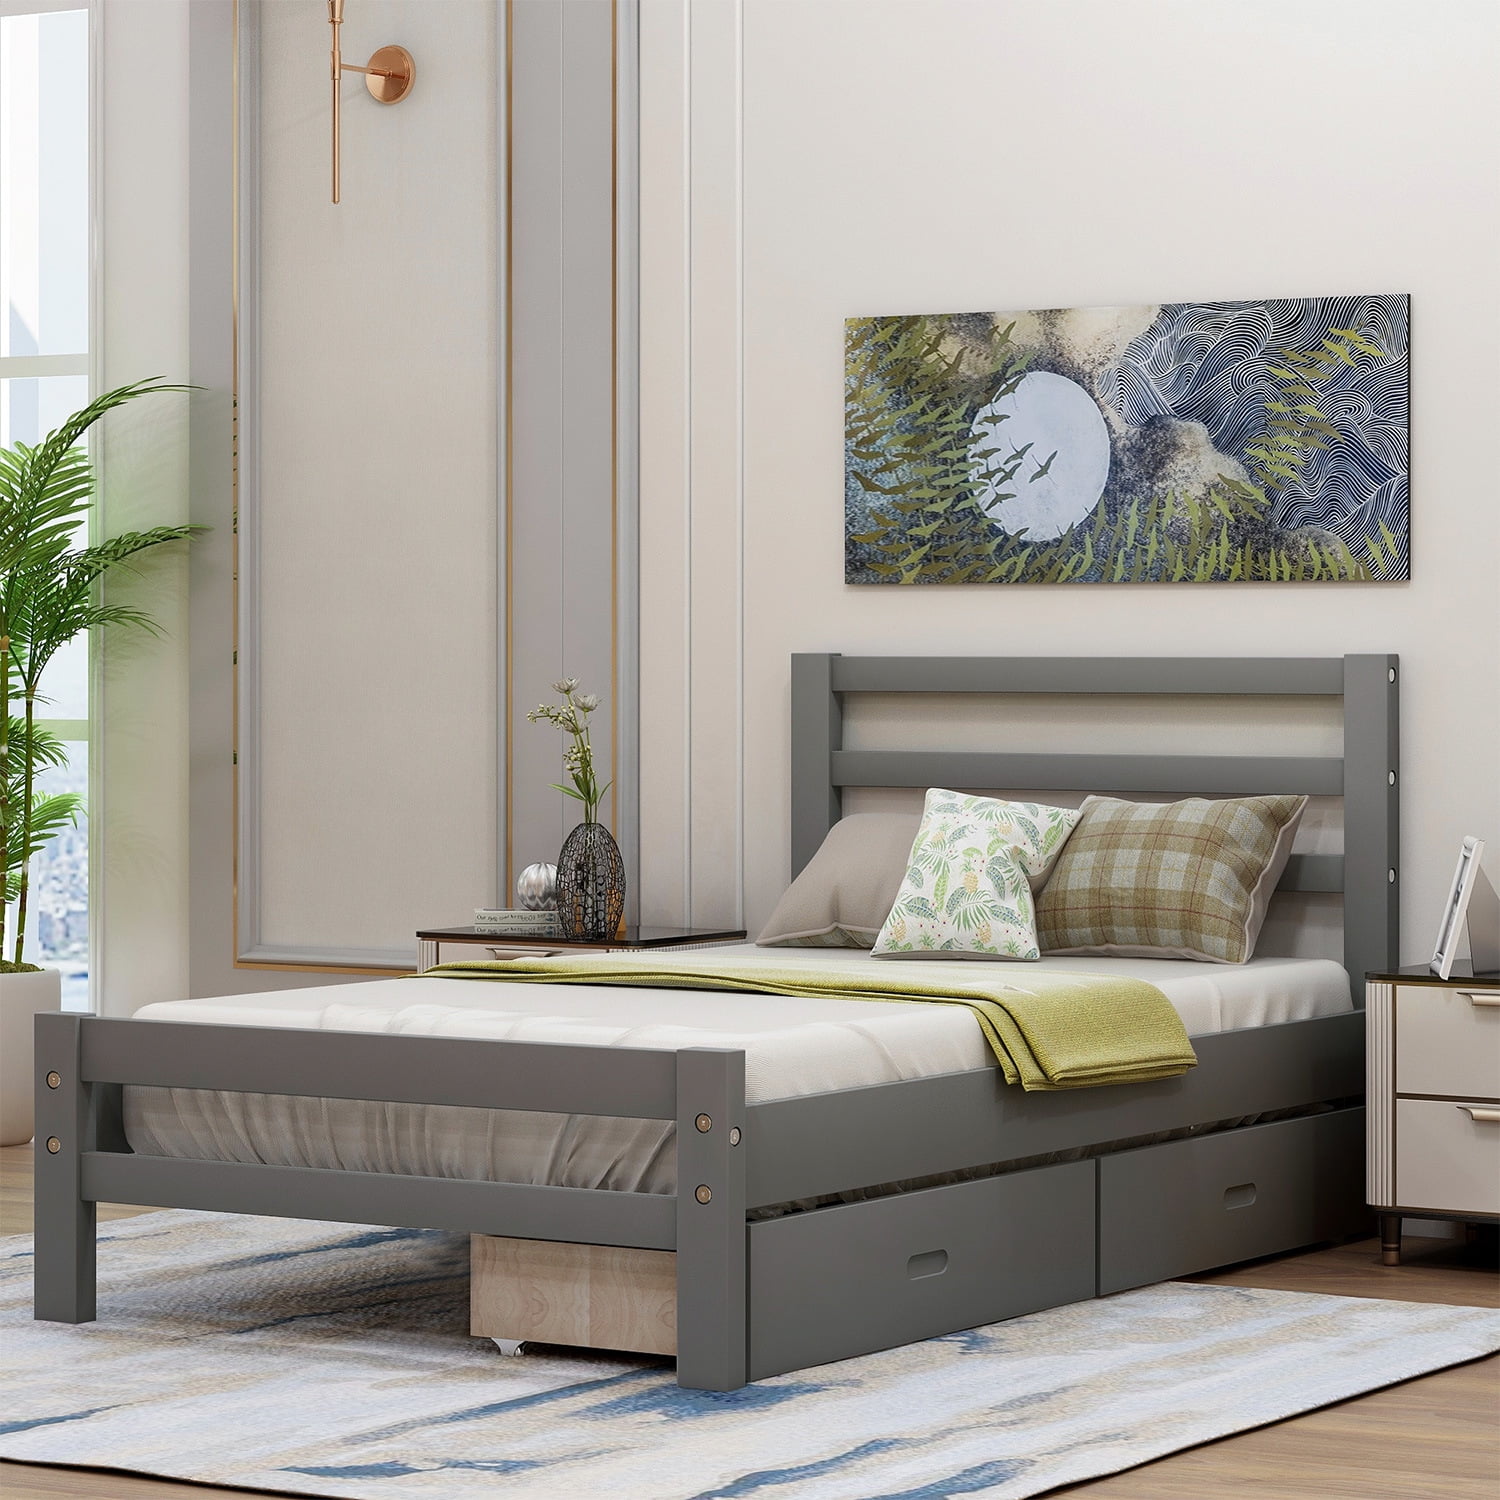 Twin Size Platform Bed With 2 Drawers And Wheels, Gray Solid Wooden Bed